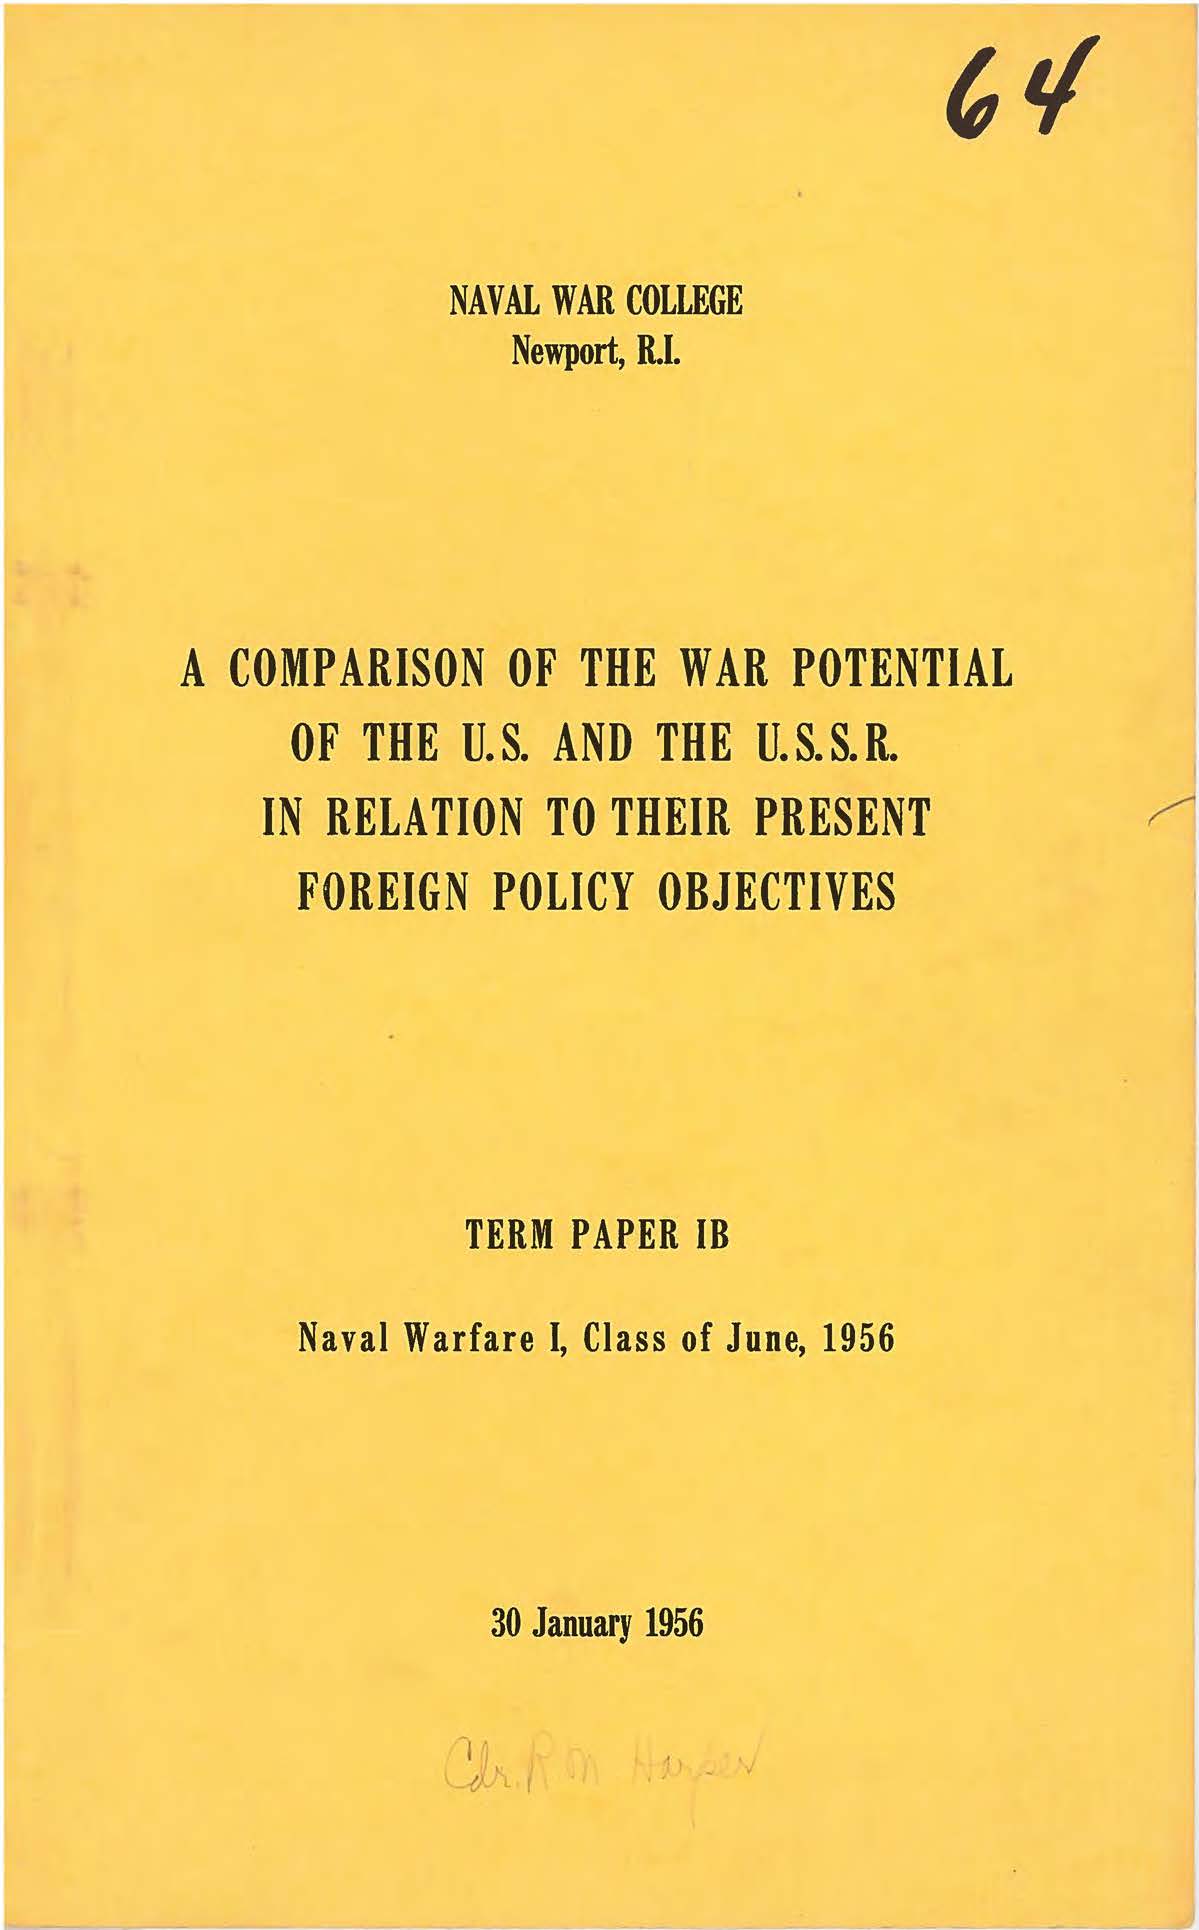 Comparison of the War Potential of the U.S. and the U.S.S.R In Relation to Their Present Foreign Policy Objectives, R.M. Harper